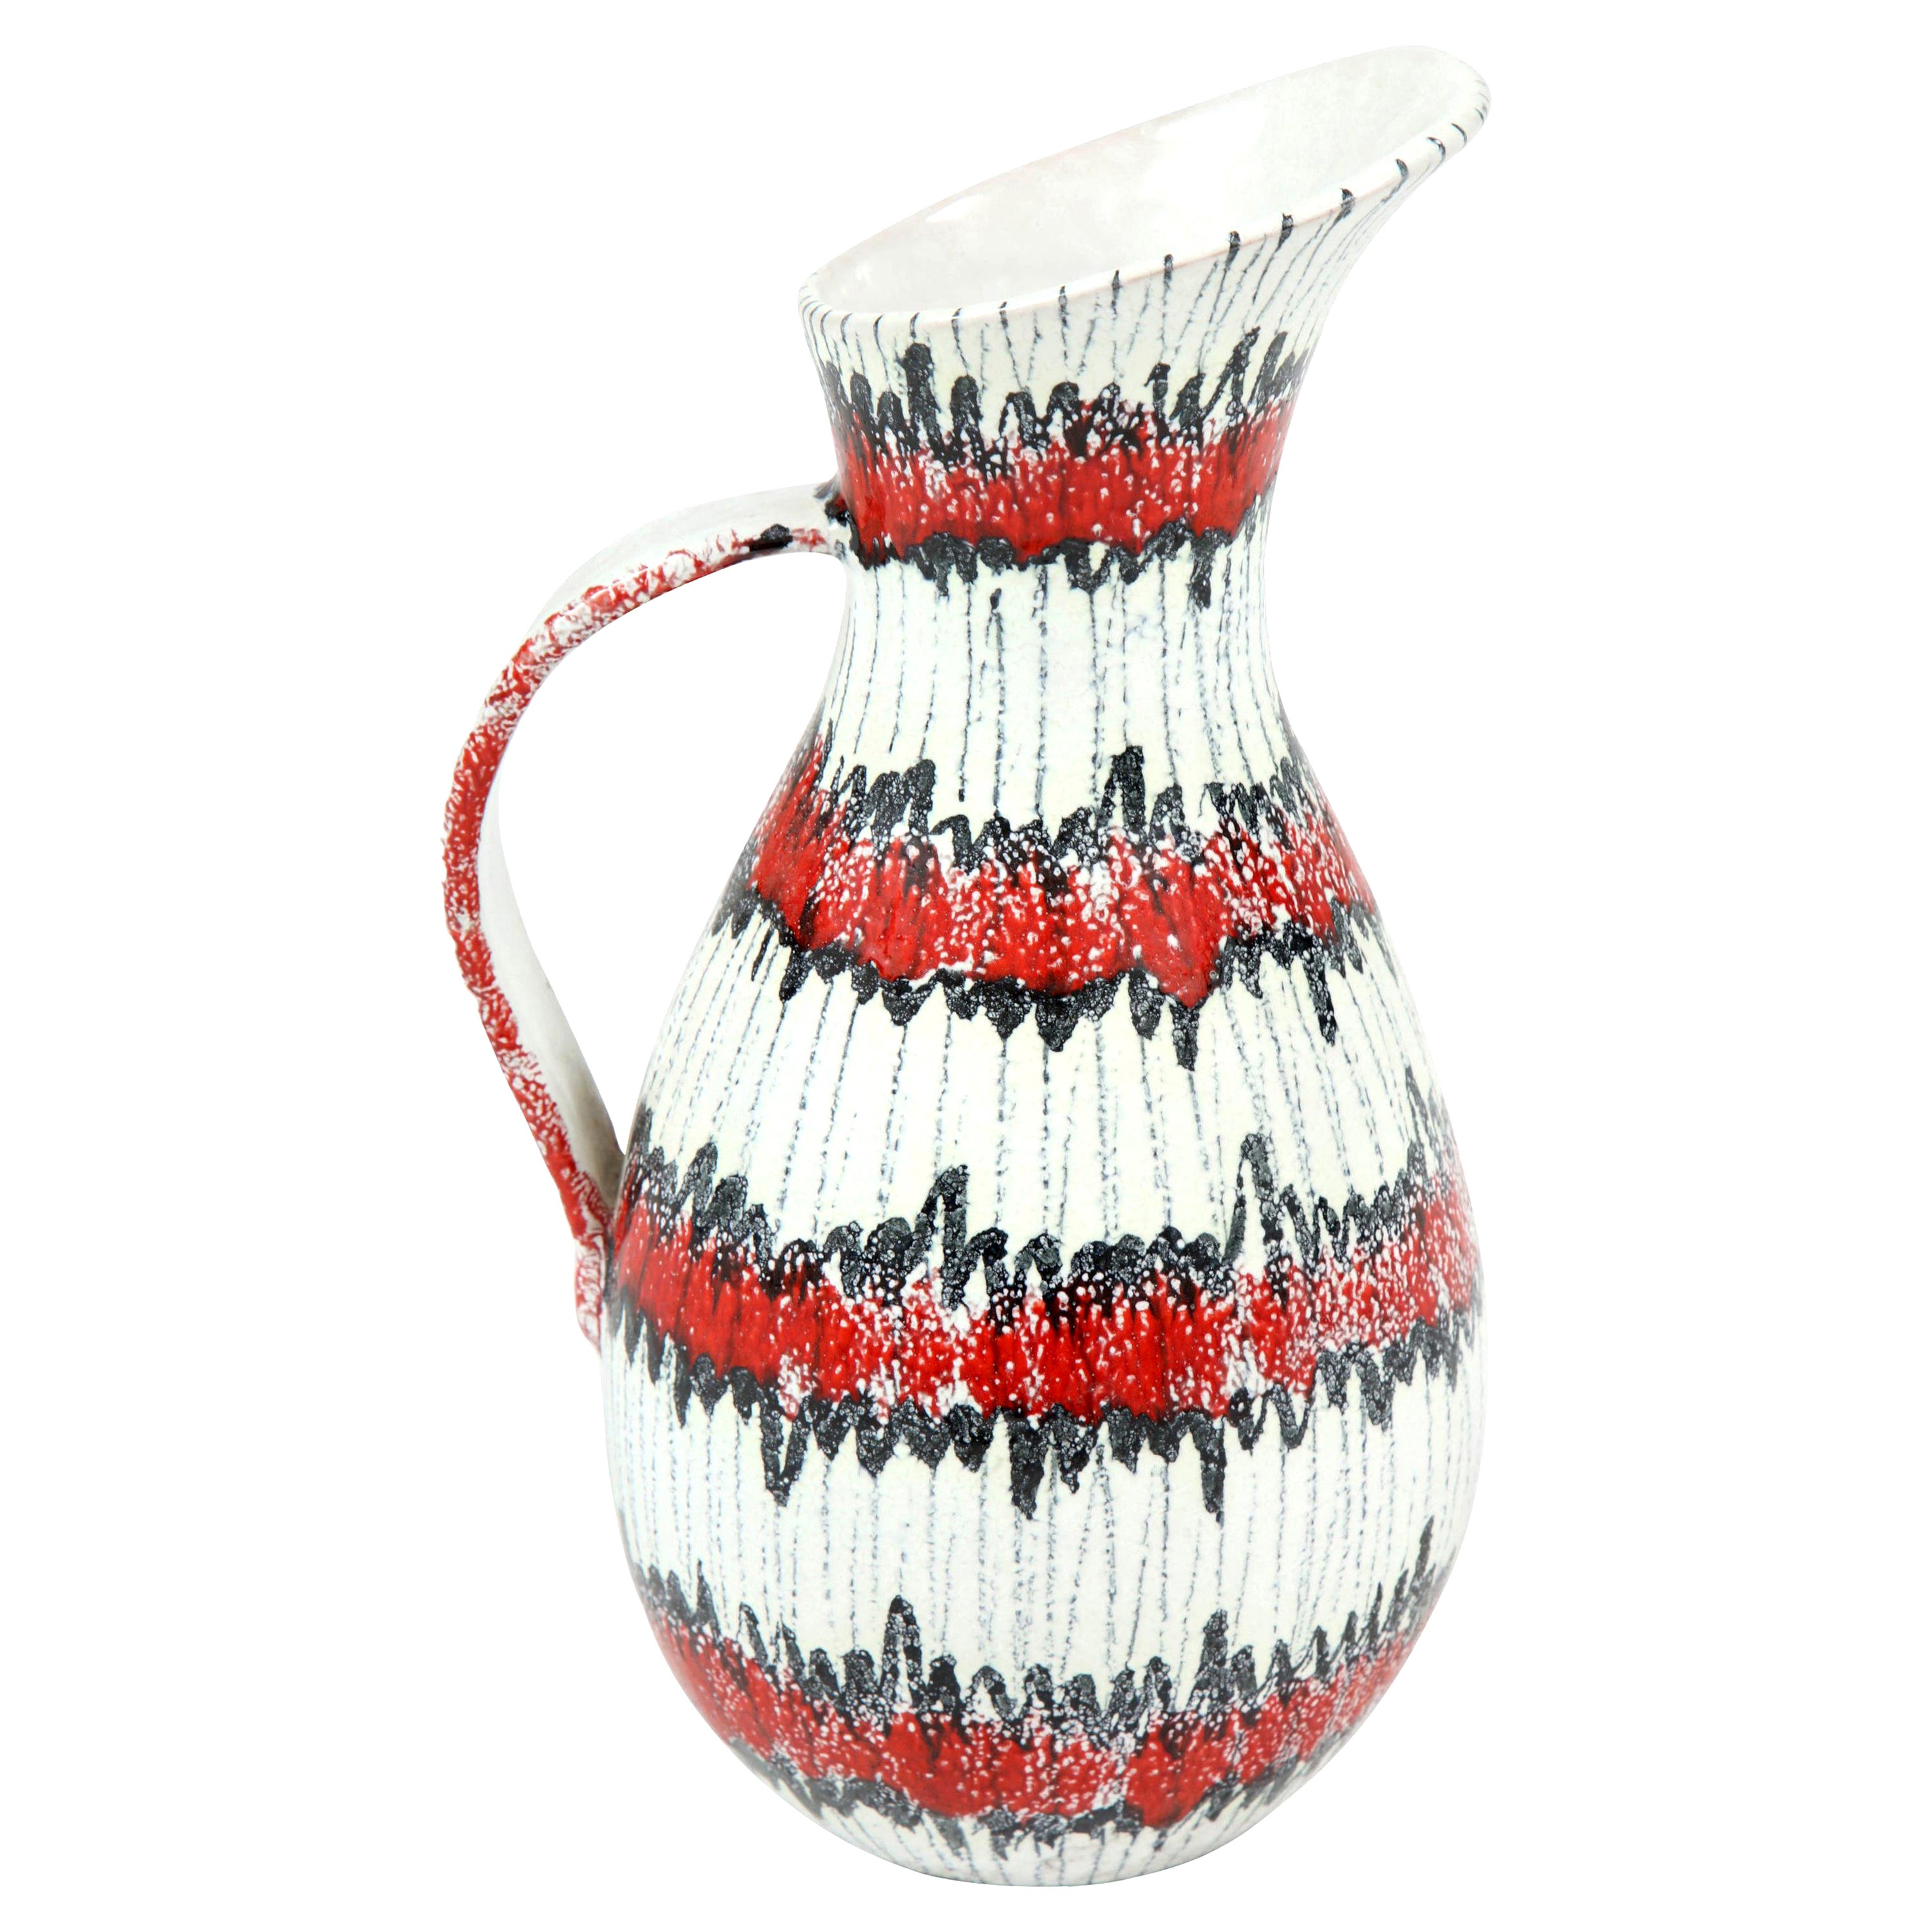 Ceramic Pitcher, Red, White and Black, Italy, Midcentury, C 1950, Ceramic For Sale